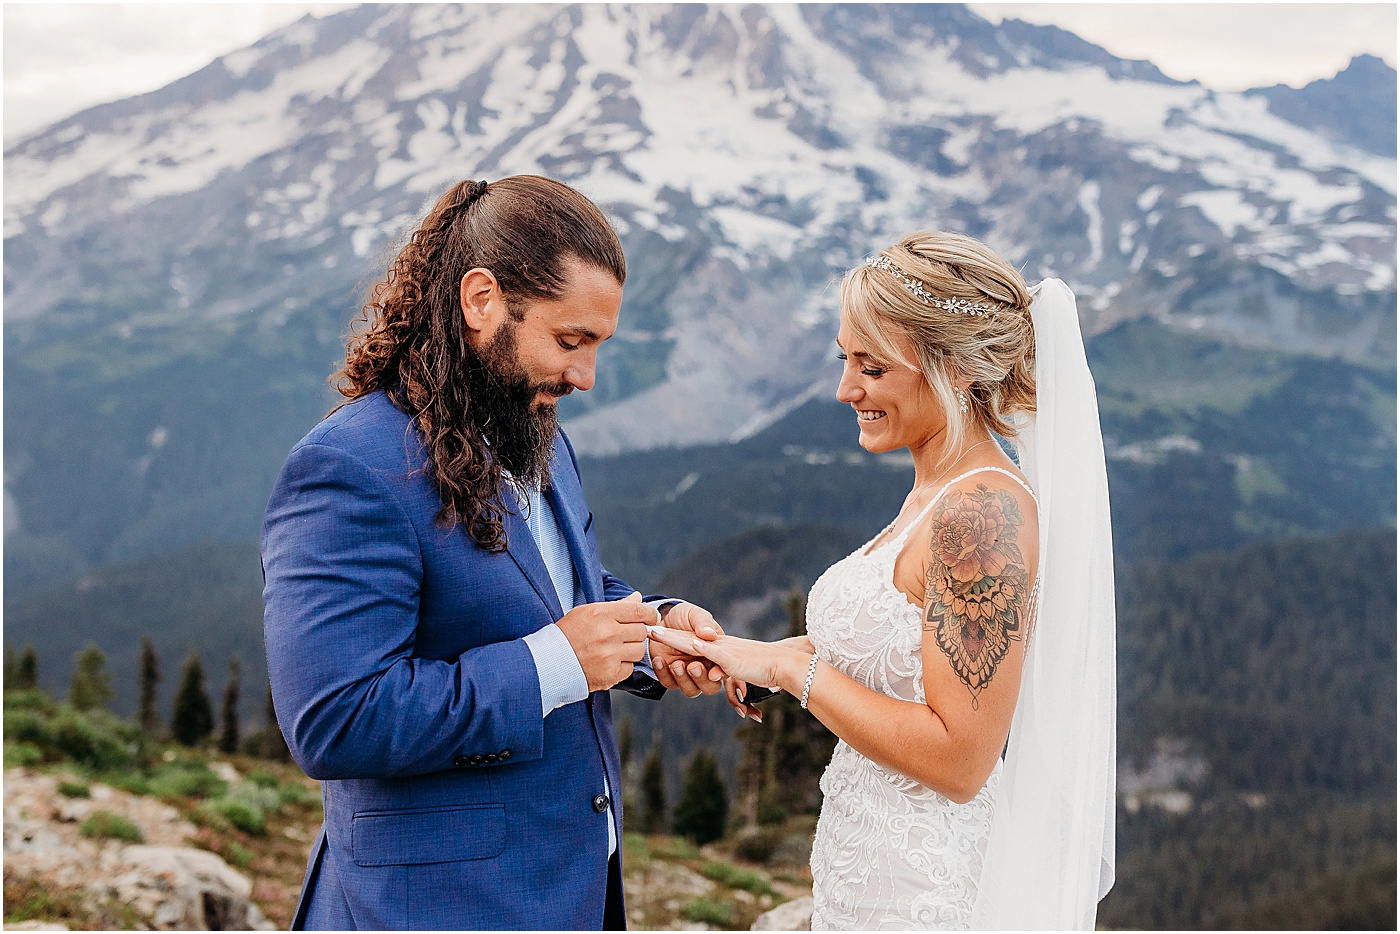 Groom putting ring on bride's finger | Photo by Megan Montalvo Photography